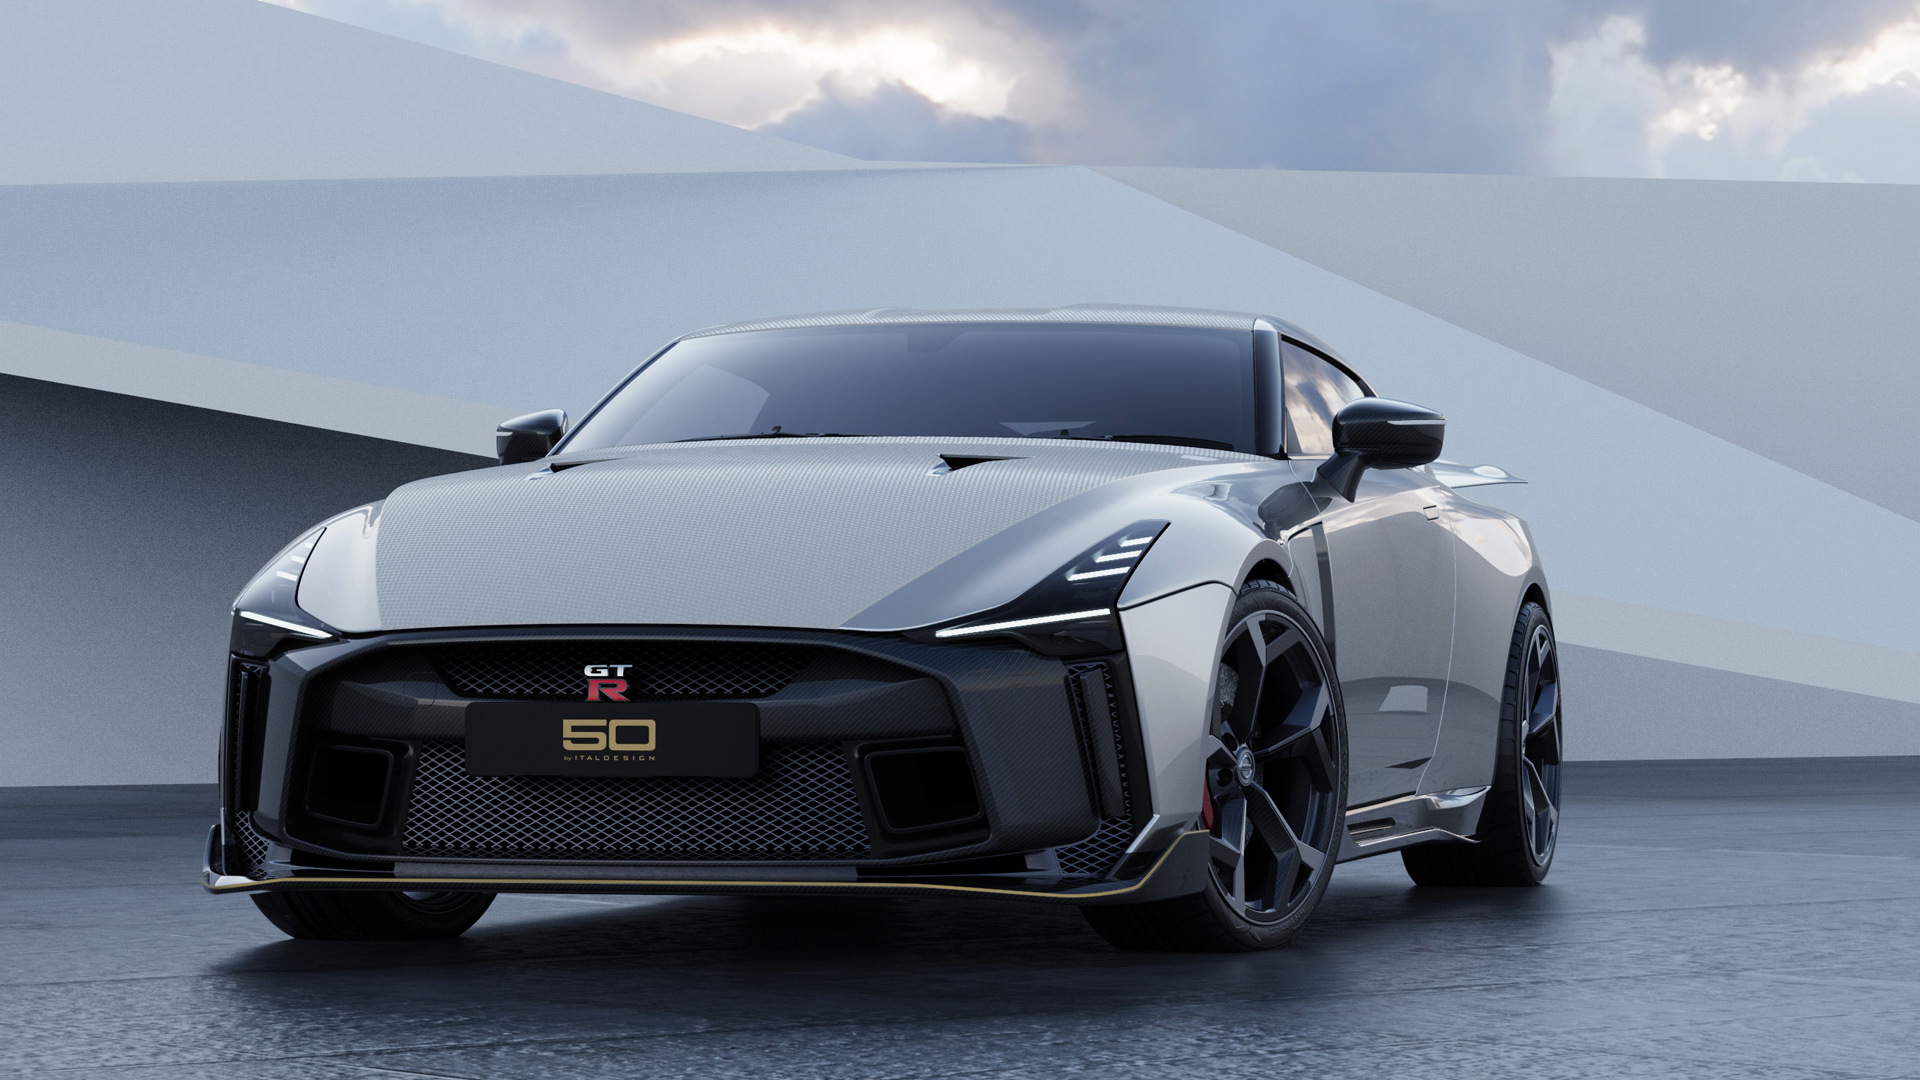 Nissan GT-R50 production version shown, deliveries start late